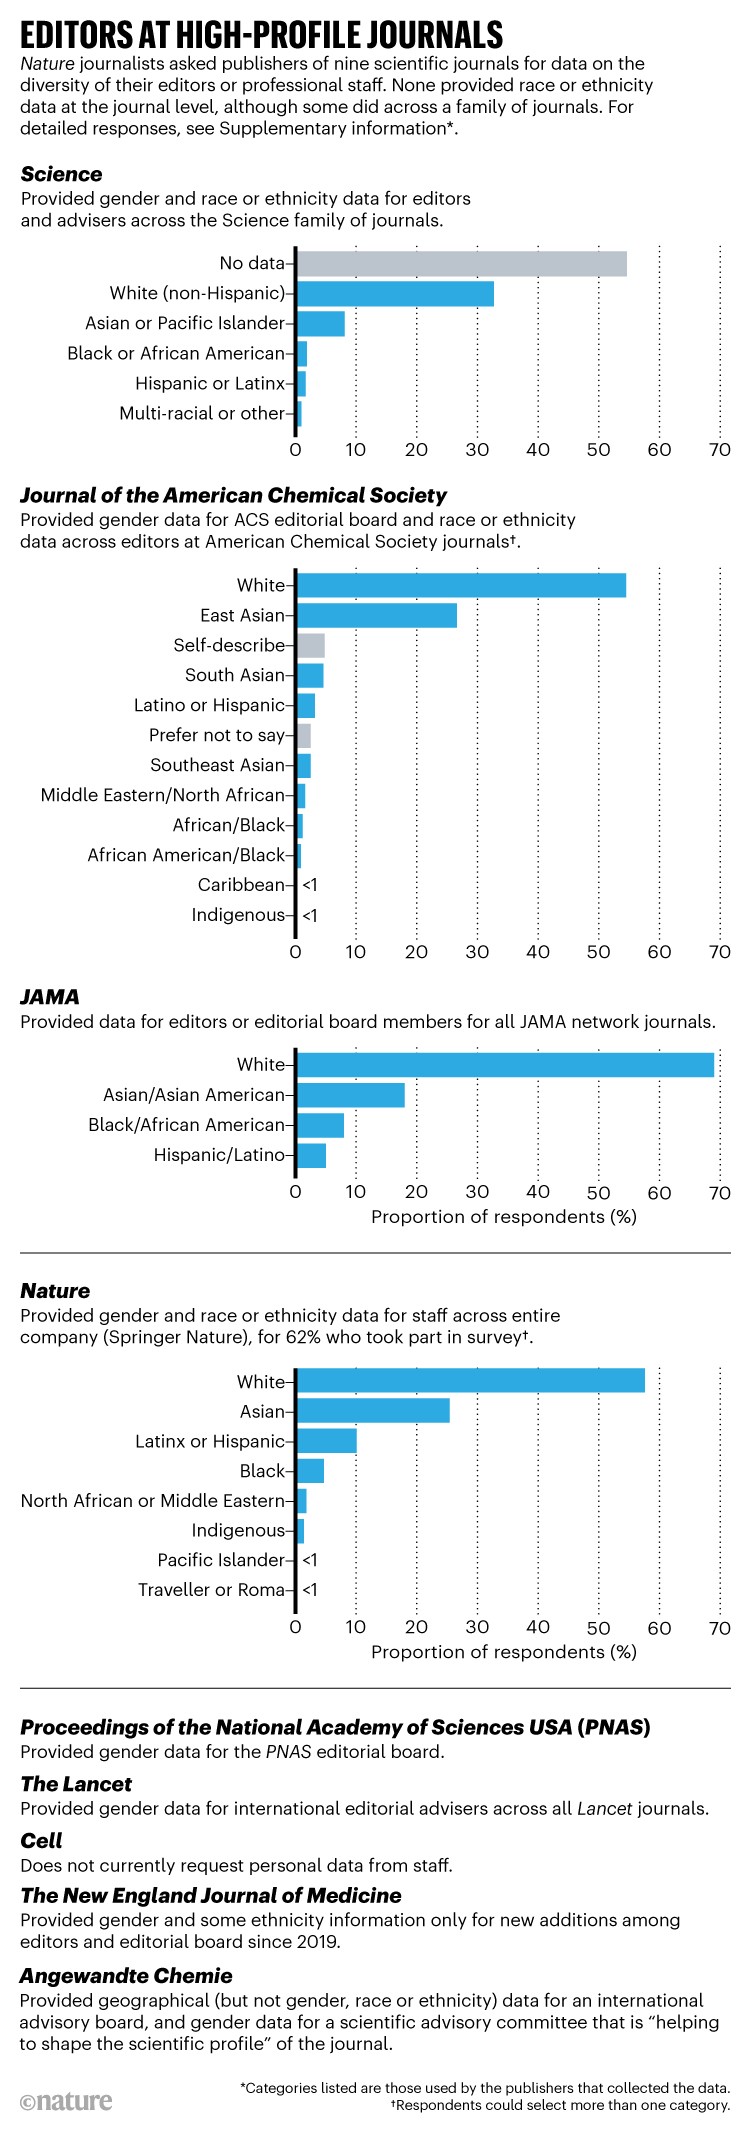 Editors at high-profile journals: Data provided to Nature from nine science journals on the diversity of their editors.